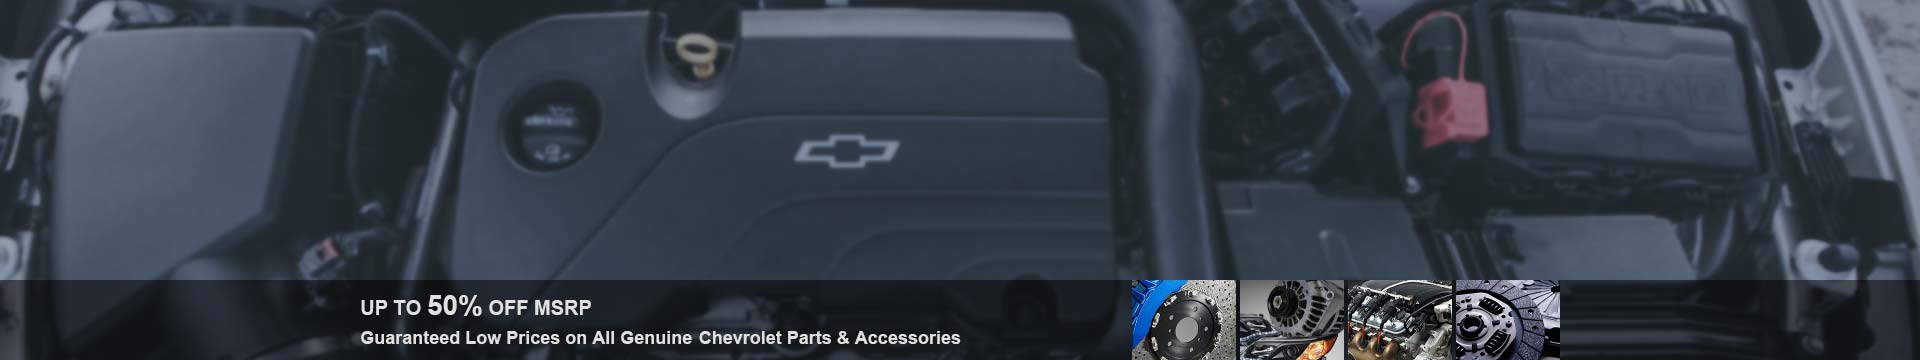 Guaranteed low prices on all Genuine Chevrolet Impala parts